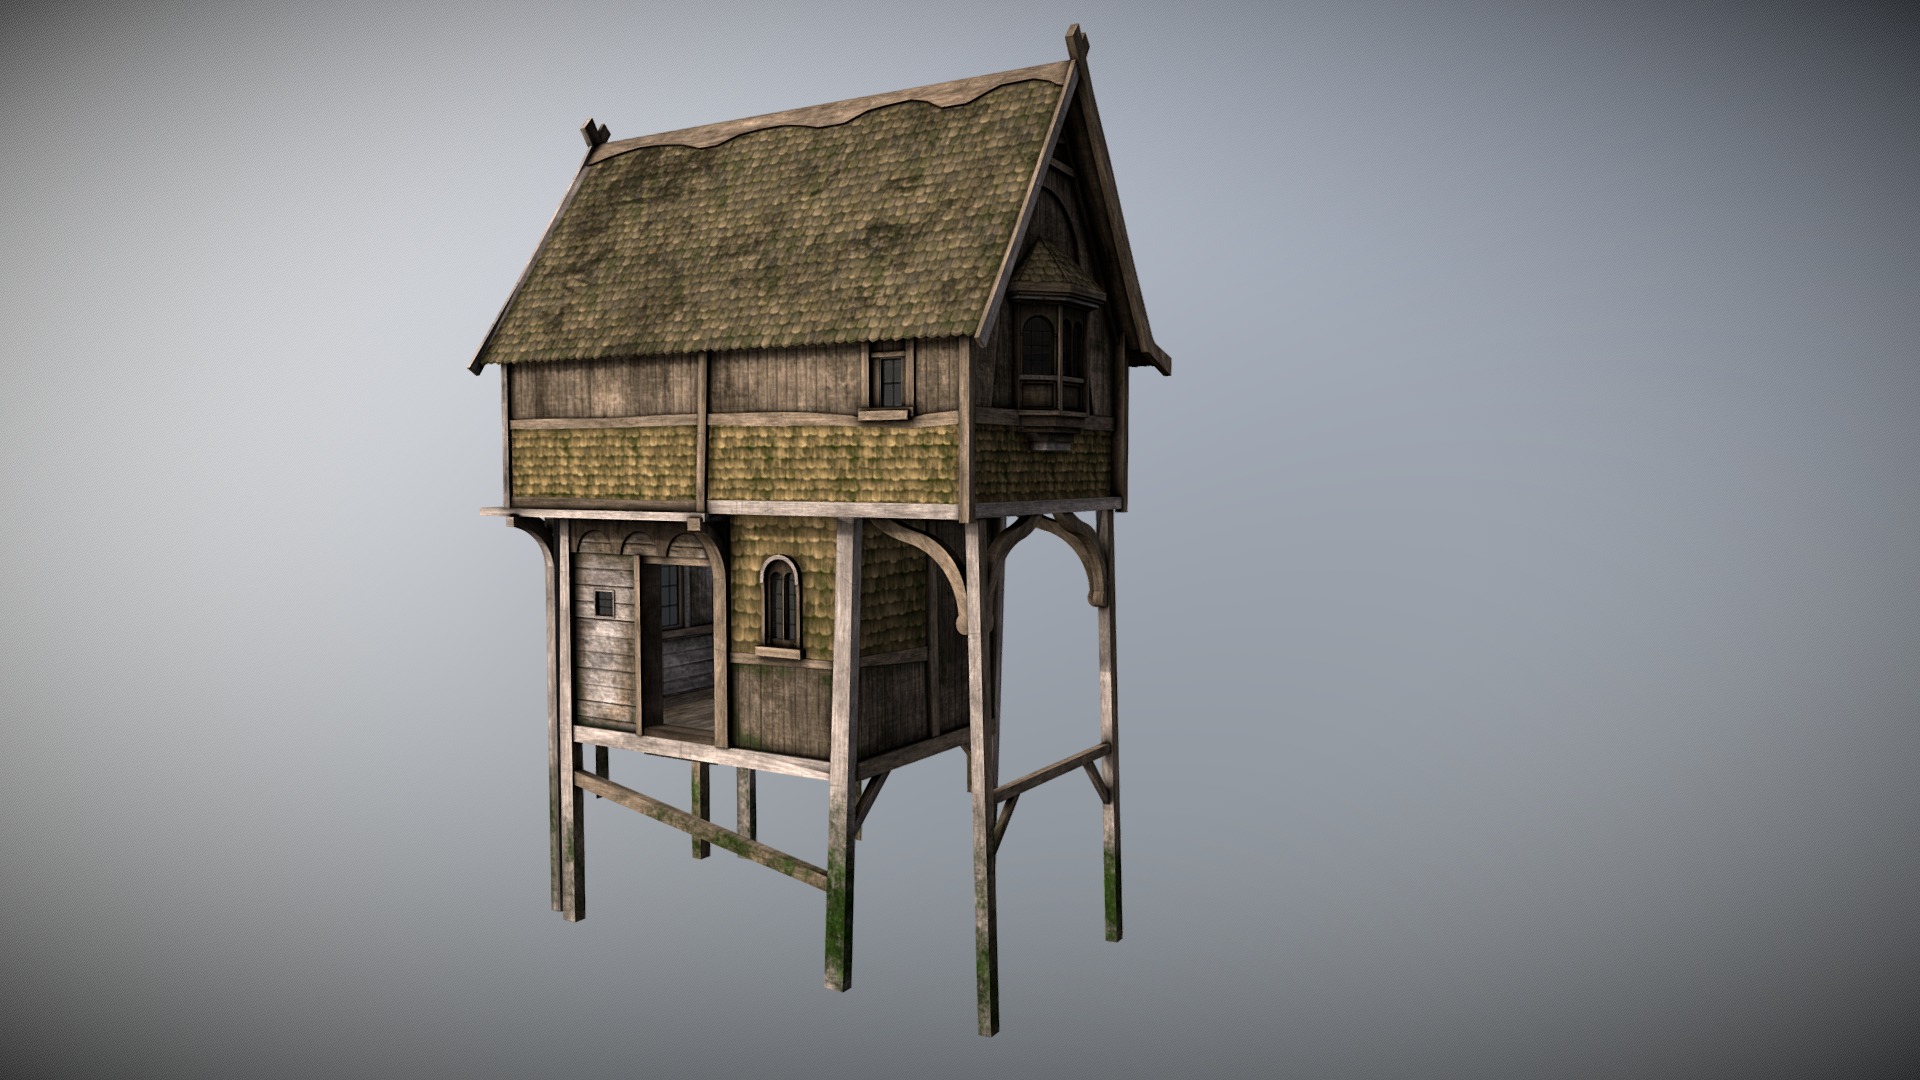 3D model Medieval Lake Village – House 1 with interiors - This is a 3D model of the Medieval Lake Village - House 1 with interiors. The 3D model is about a small wooden house.